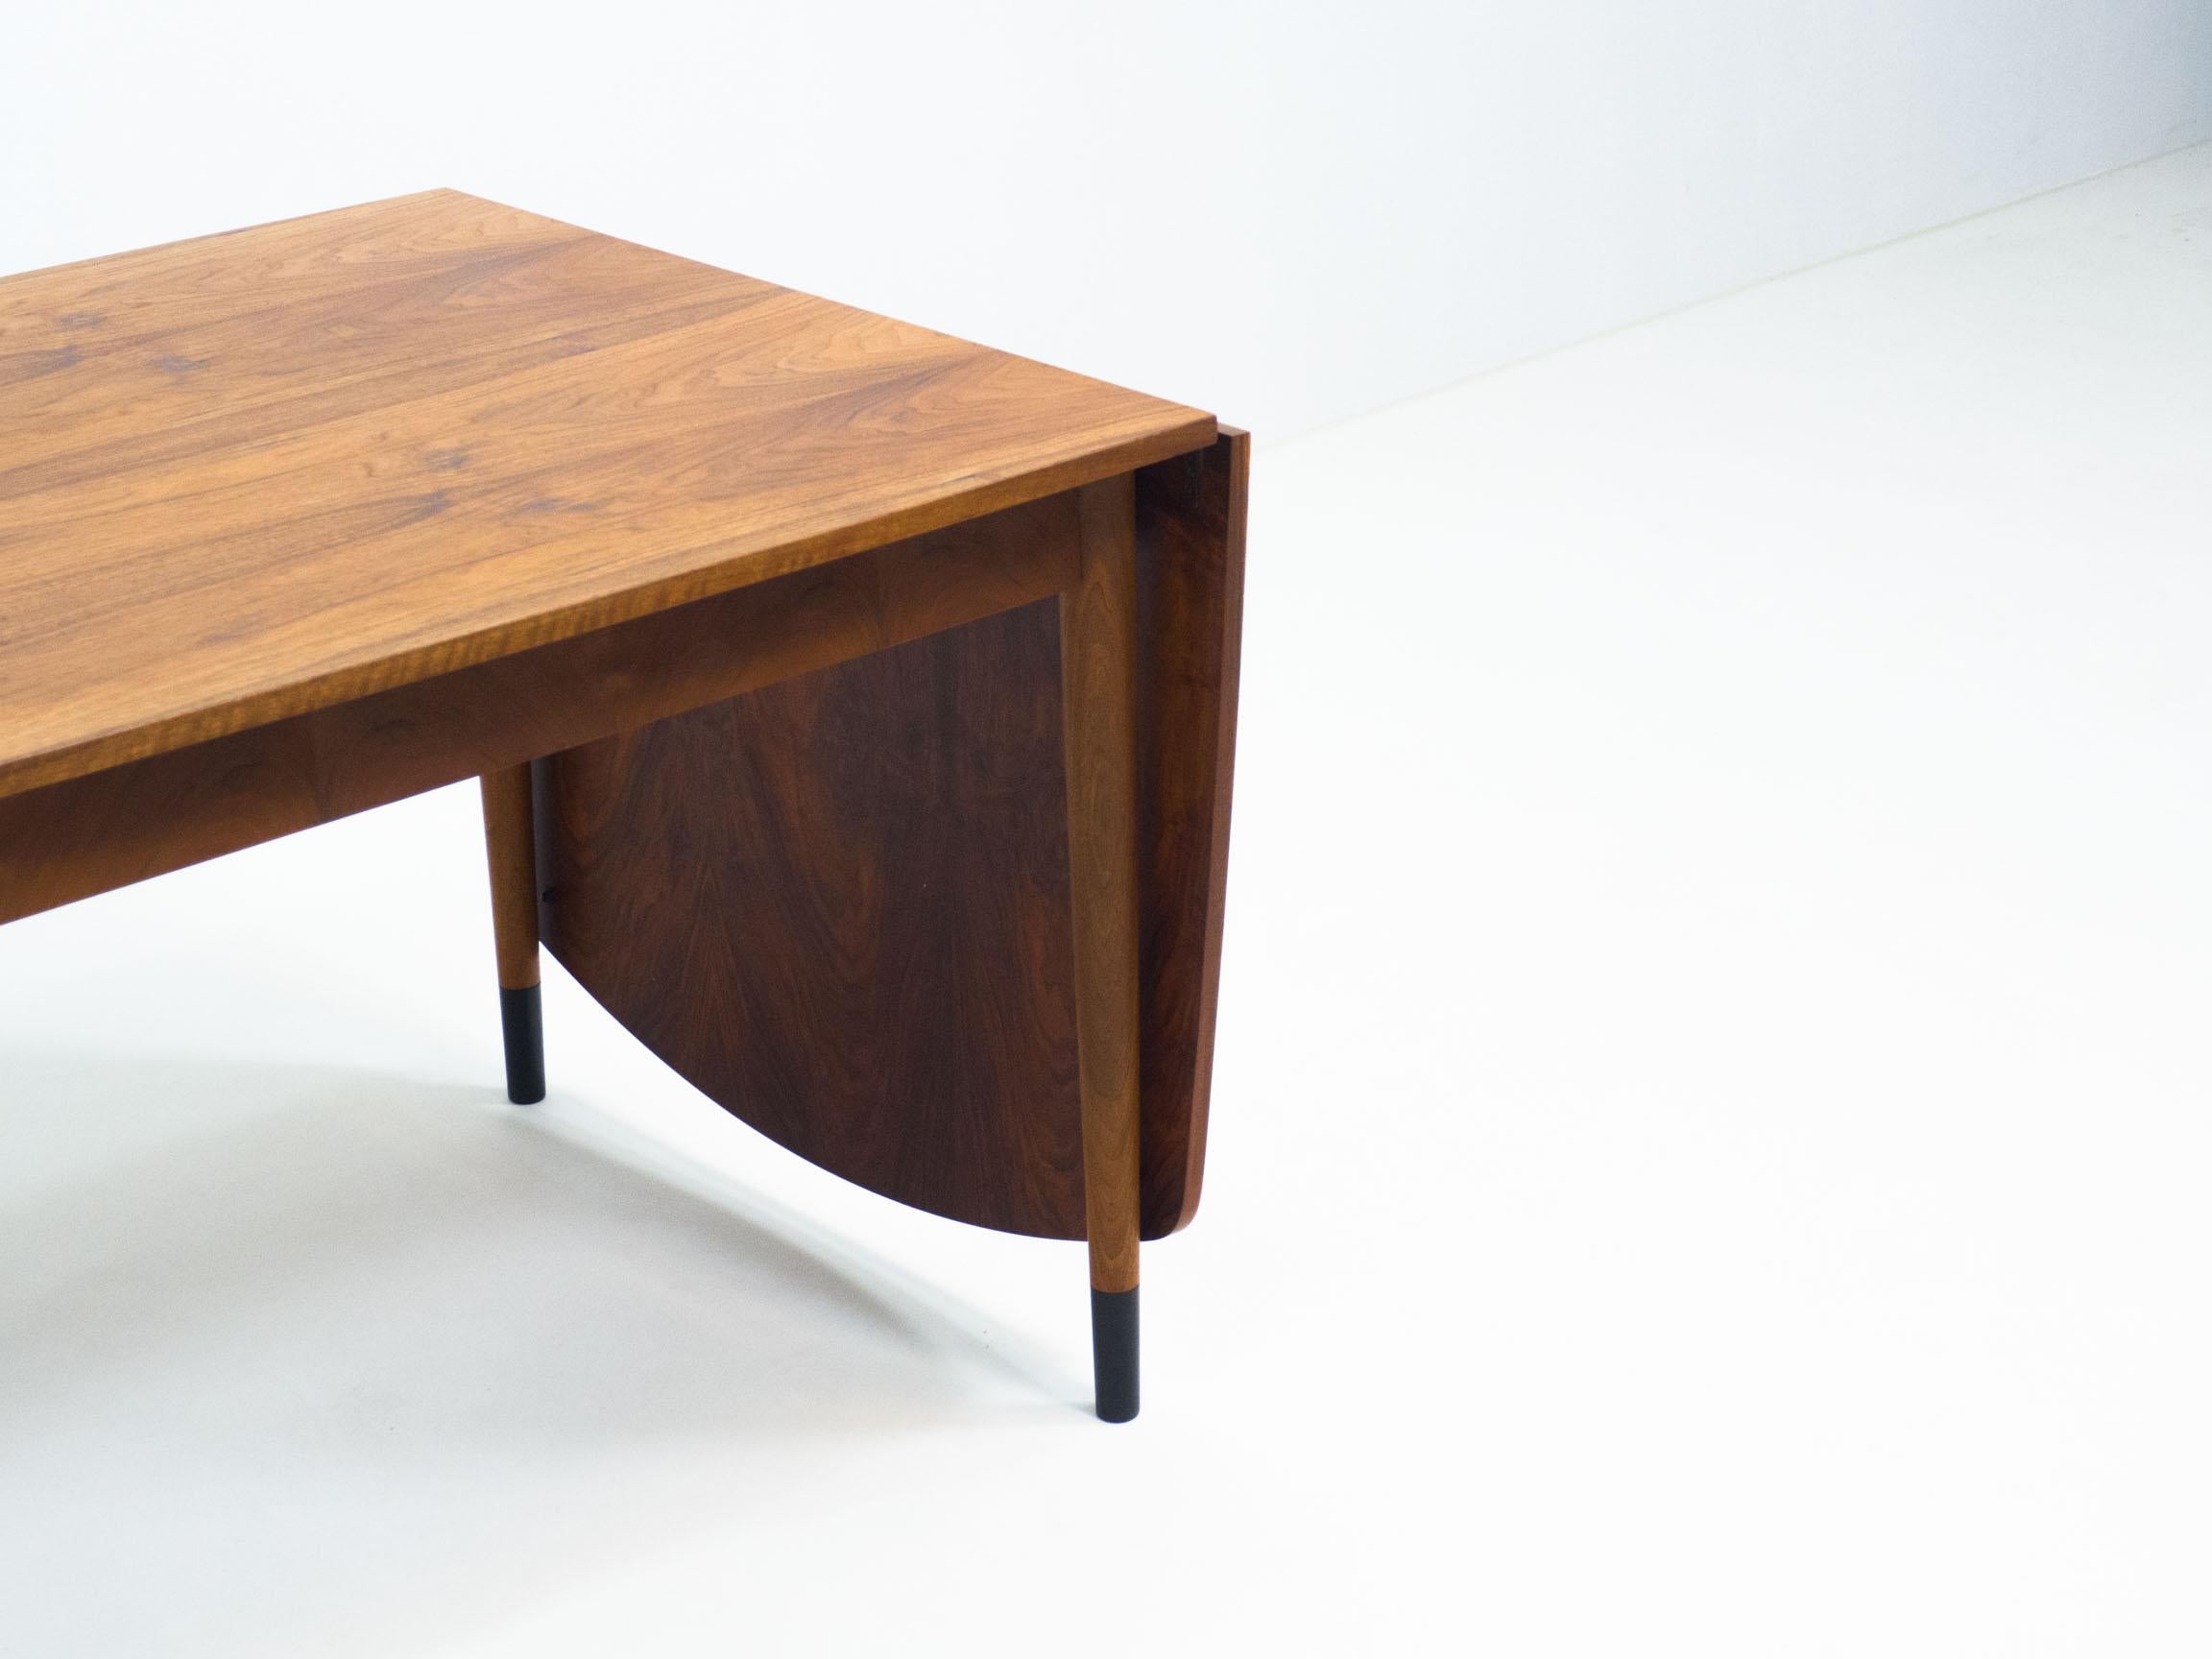 Vintage drop leaf table with lovely organic shapes.

This table has a curve througout the edges. This makes the design look very organic. The surface has been veneered with walnut veneer. The legs have dark stained ‘socks’.

The table has been